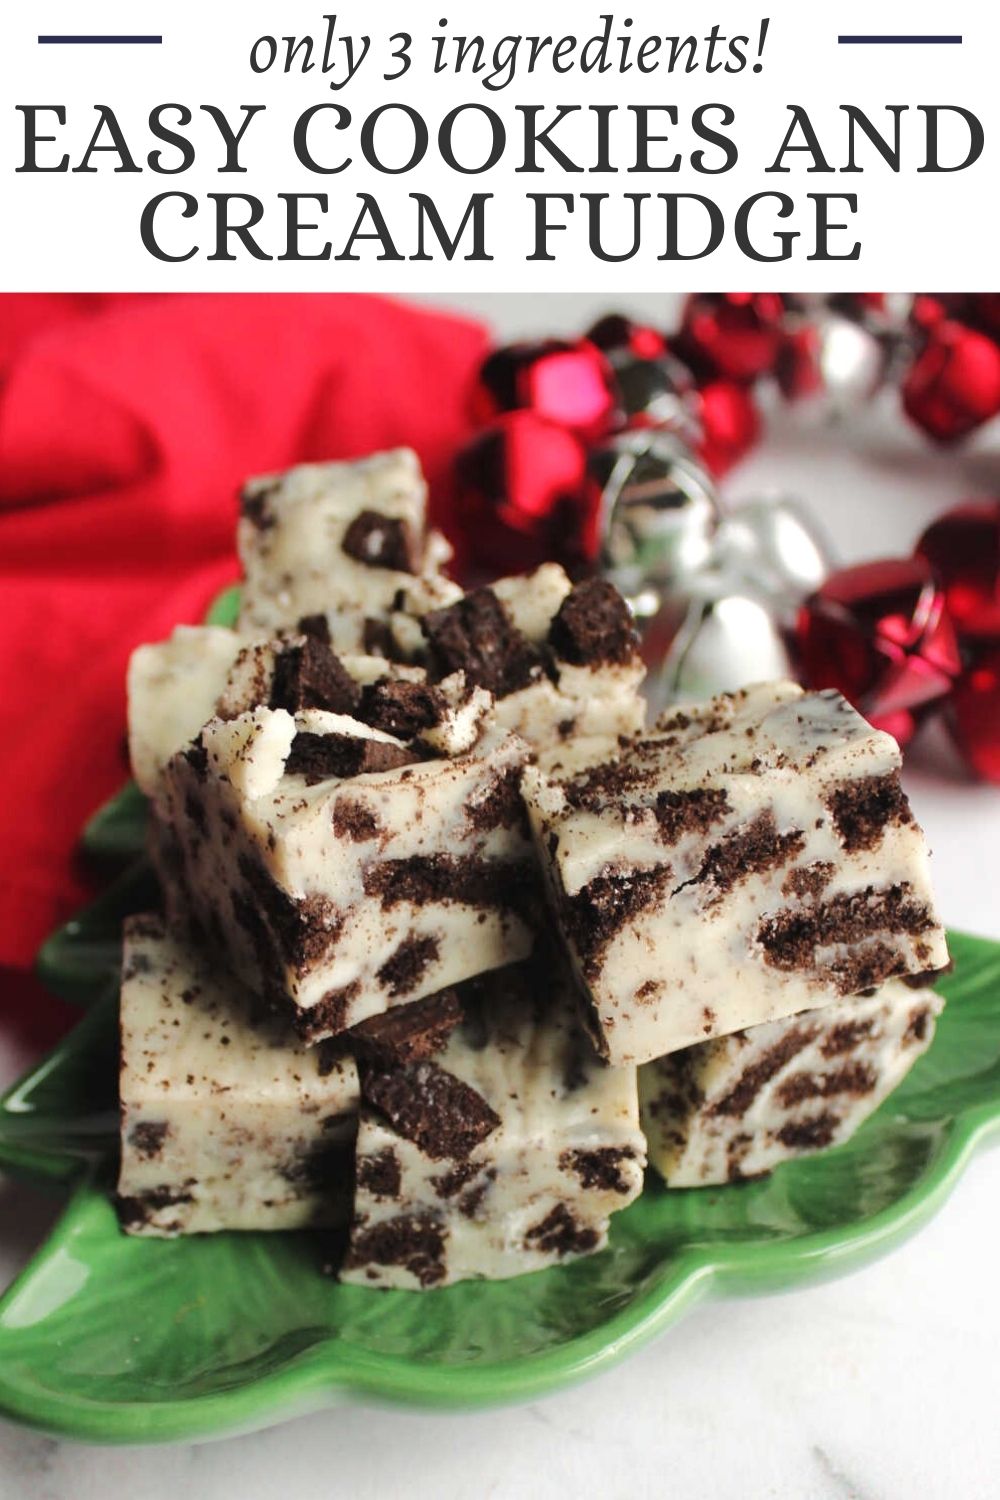 Making cookies and cream fudge is so easy! This recipe comes together in just a few minutes and tastes amazing. Oreos and creamy white fudge come together to make the perfect treat.